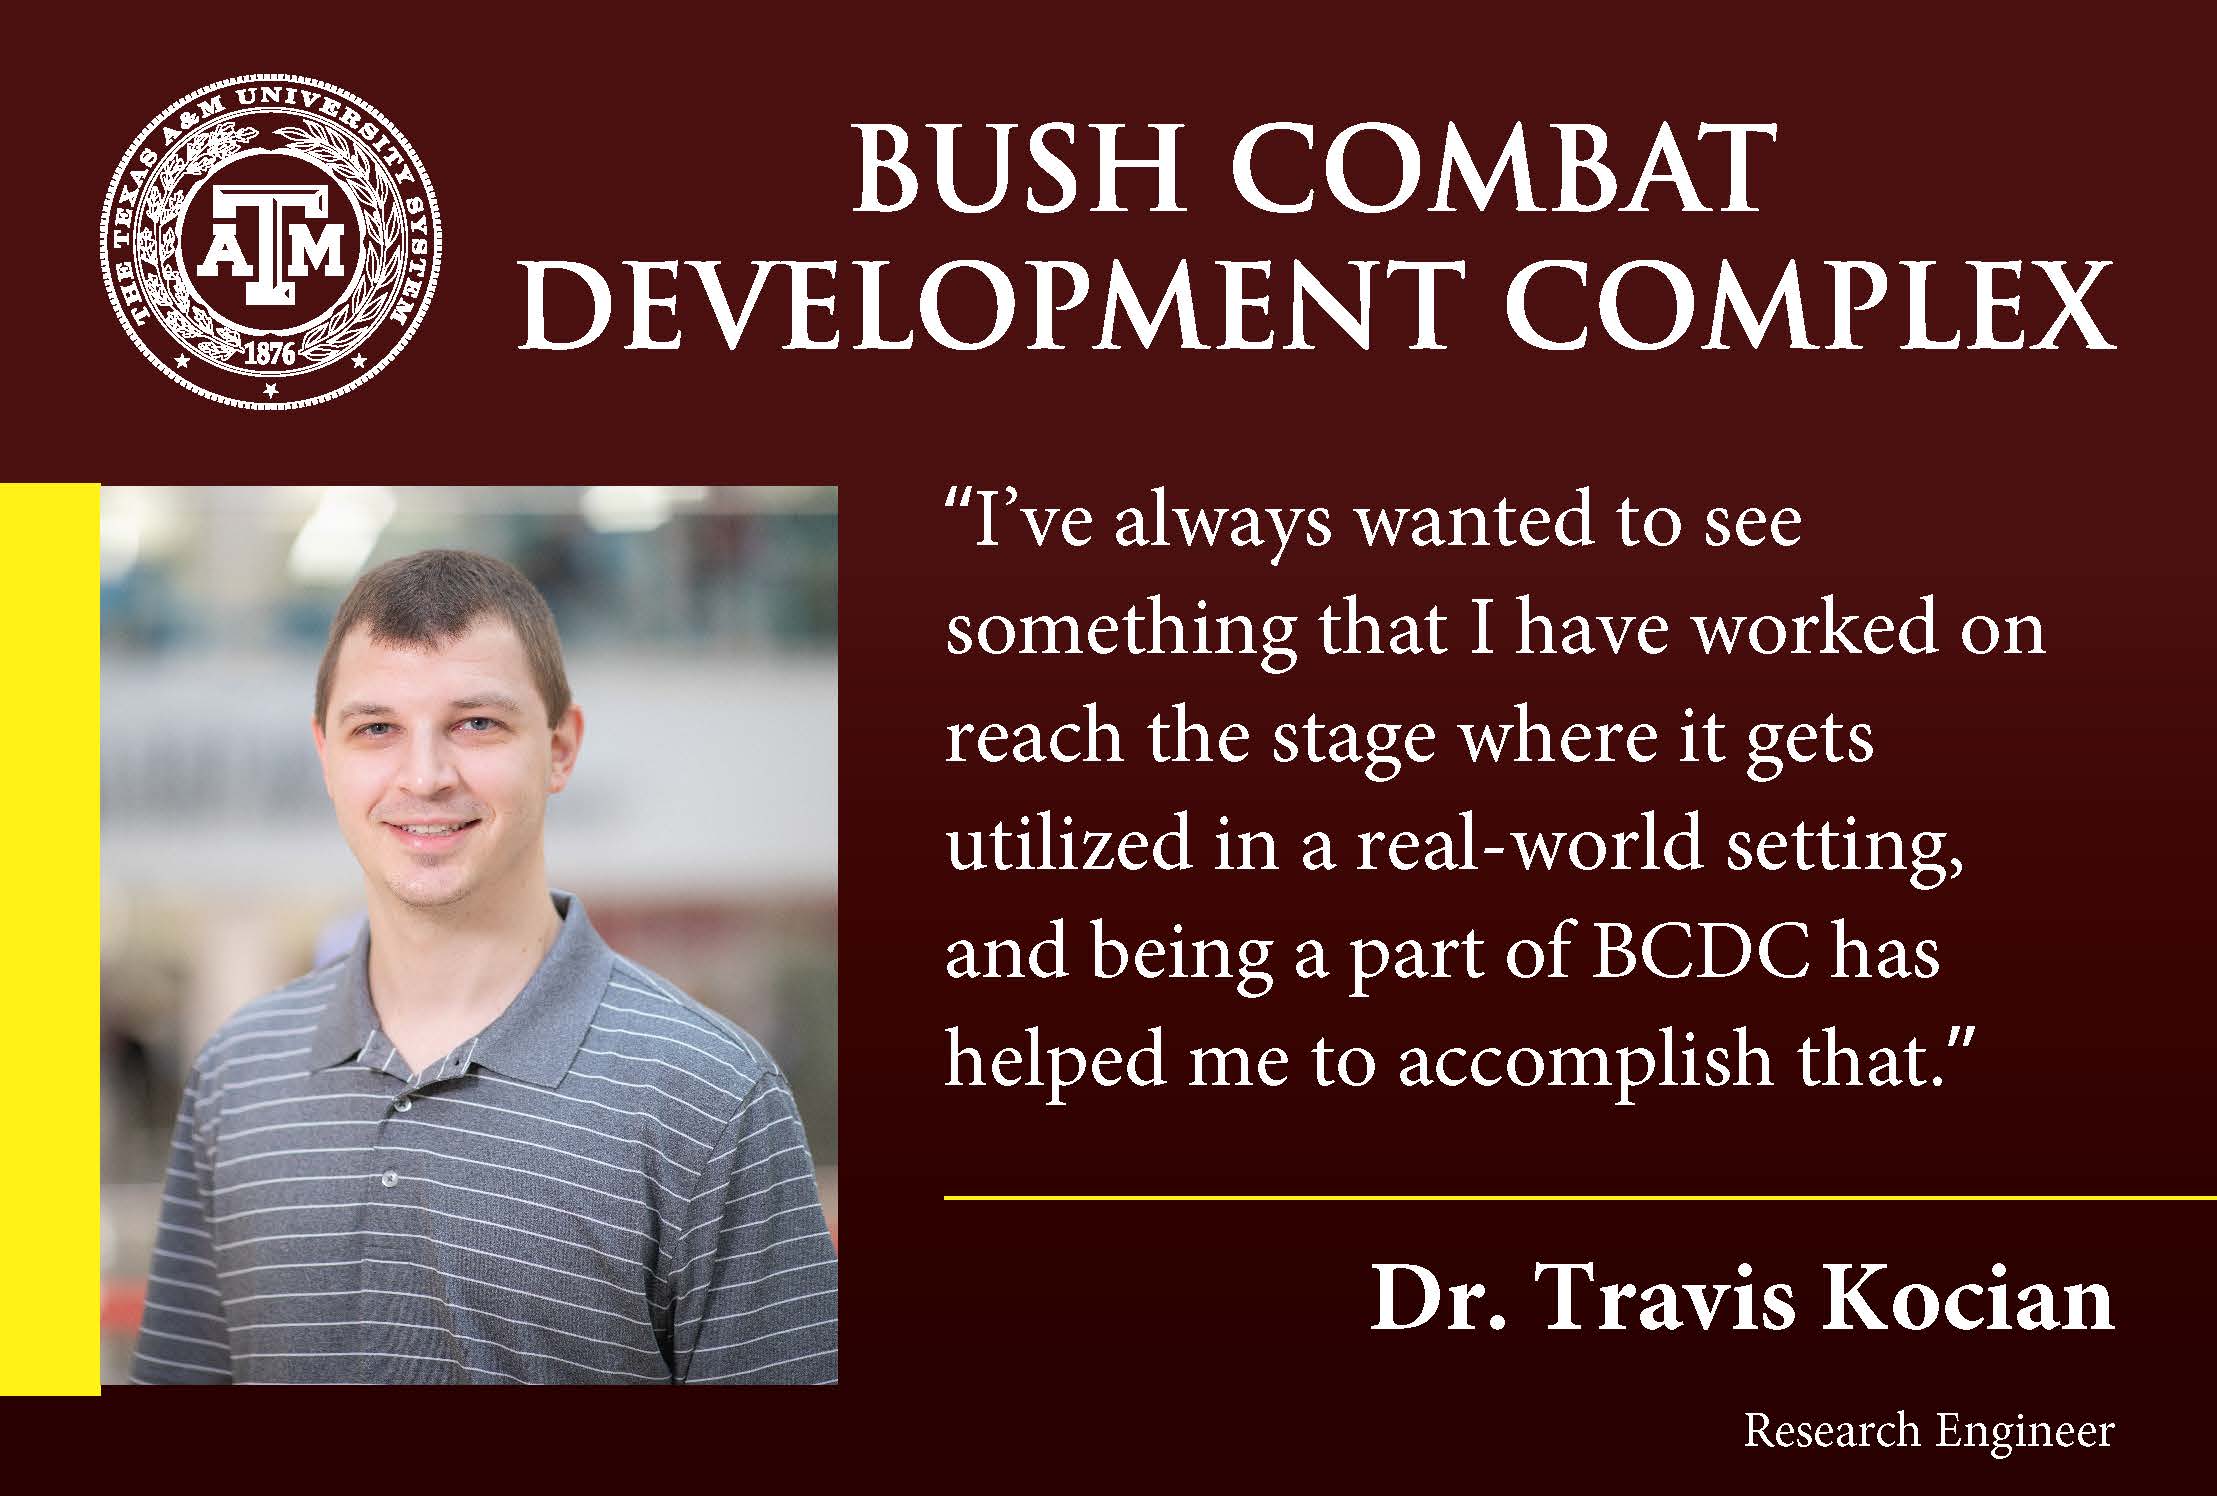 Researcher of the Week graphic highlighting Dr. Travis Kocian, BCDC research engineer